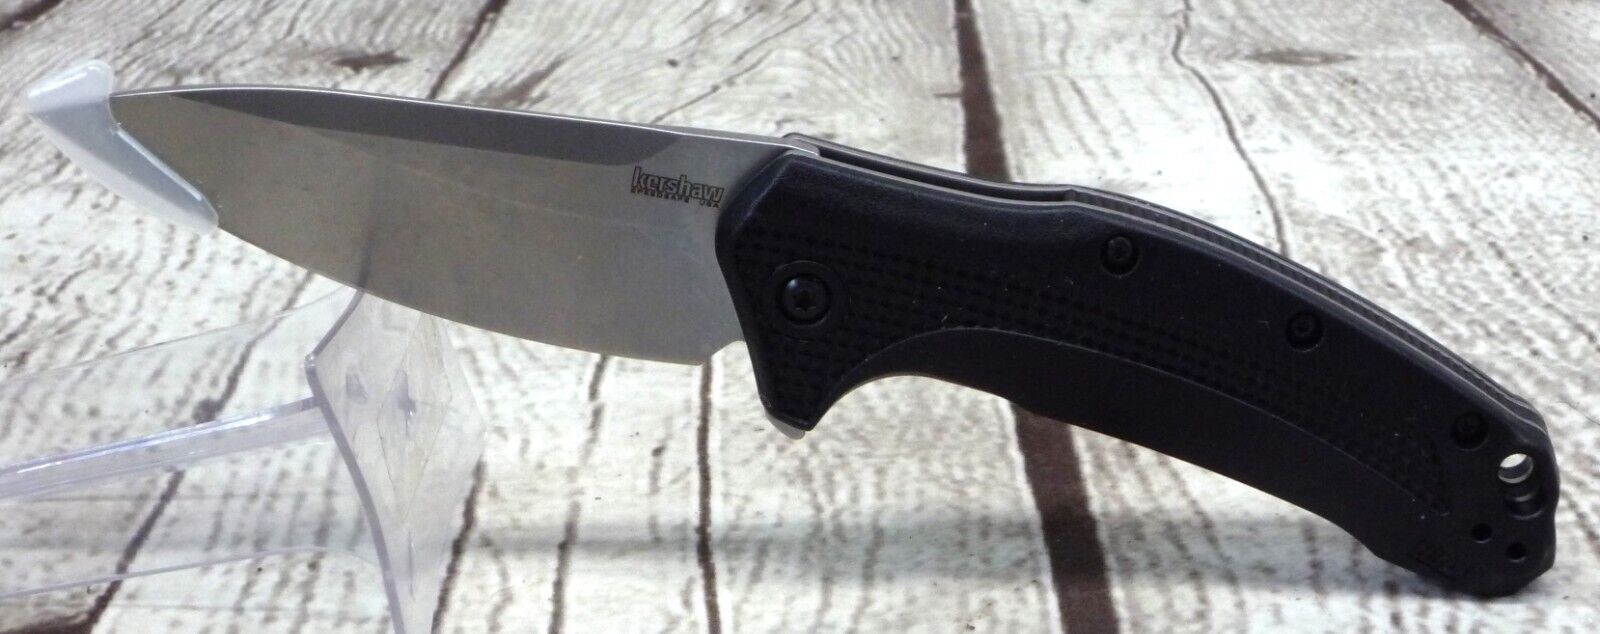 Kershaw 1776 Link Folding Knife Brand New Discontinued